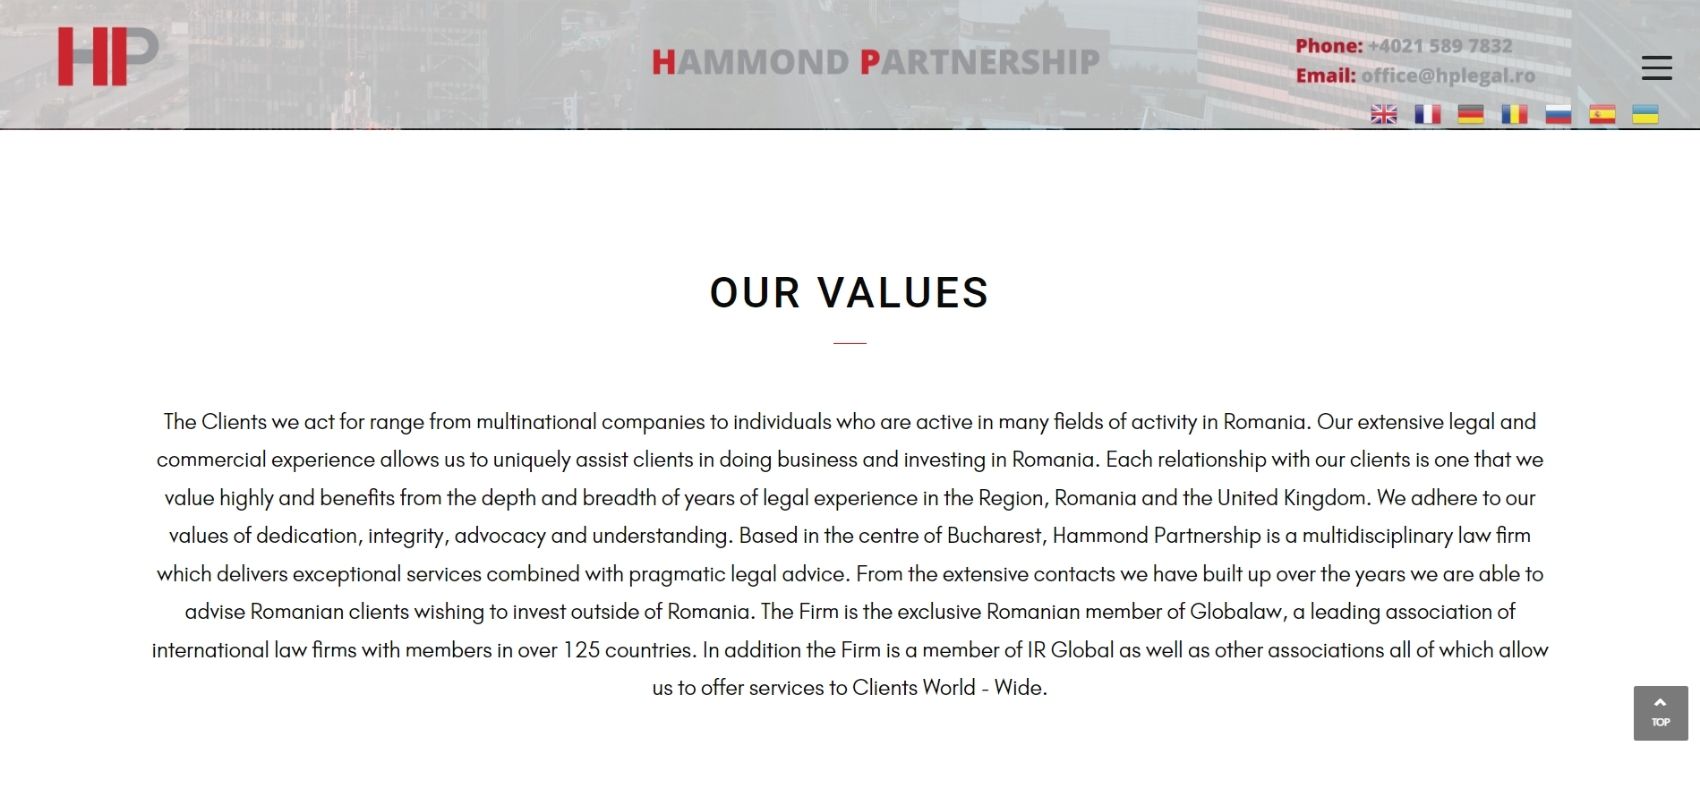 HP Legal homepage - values